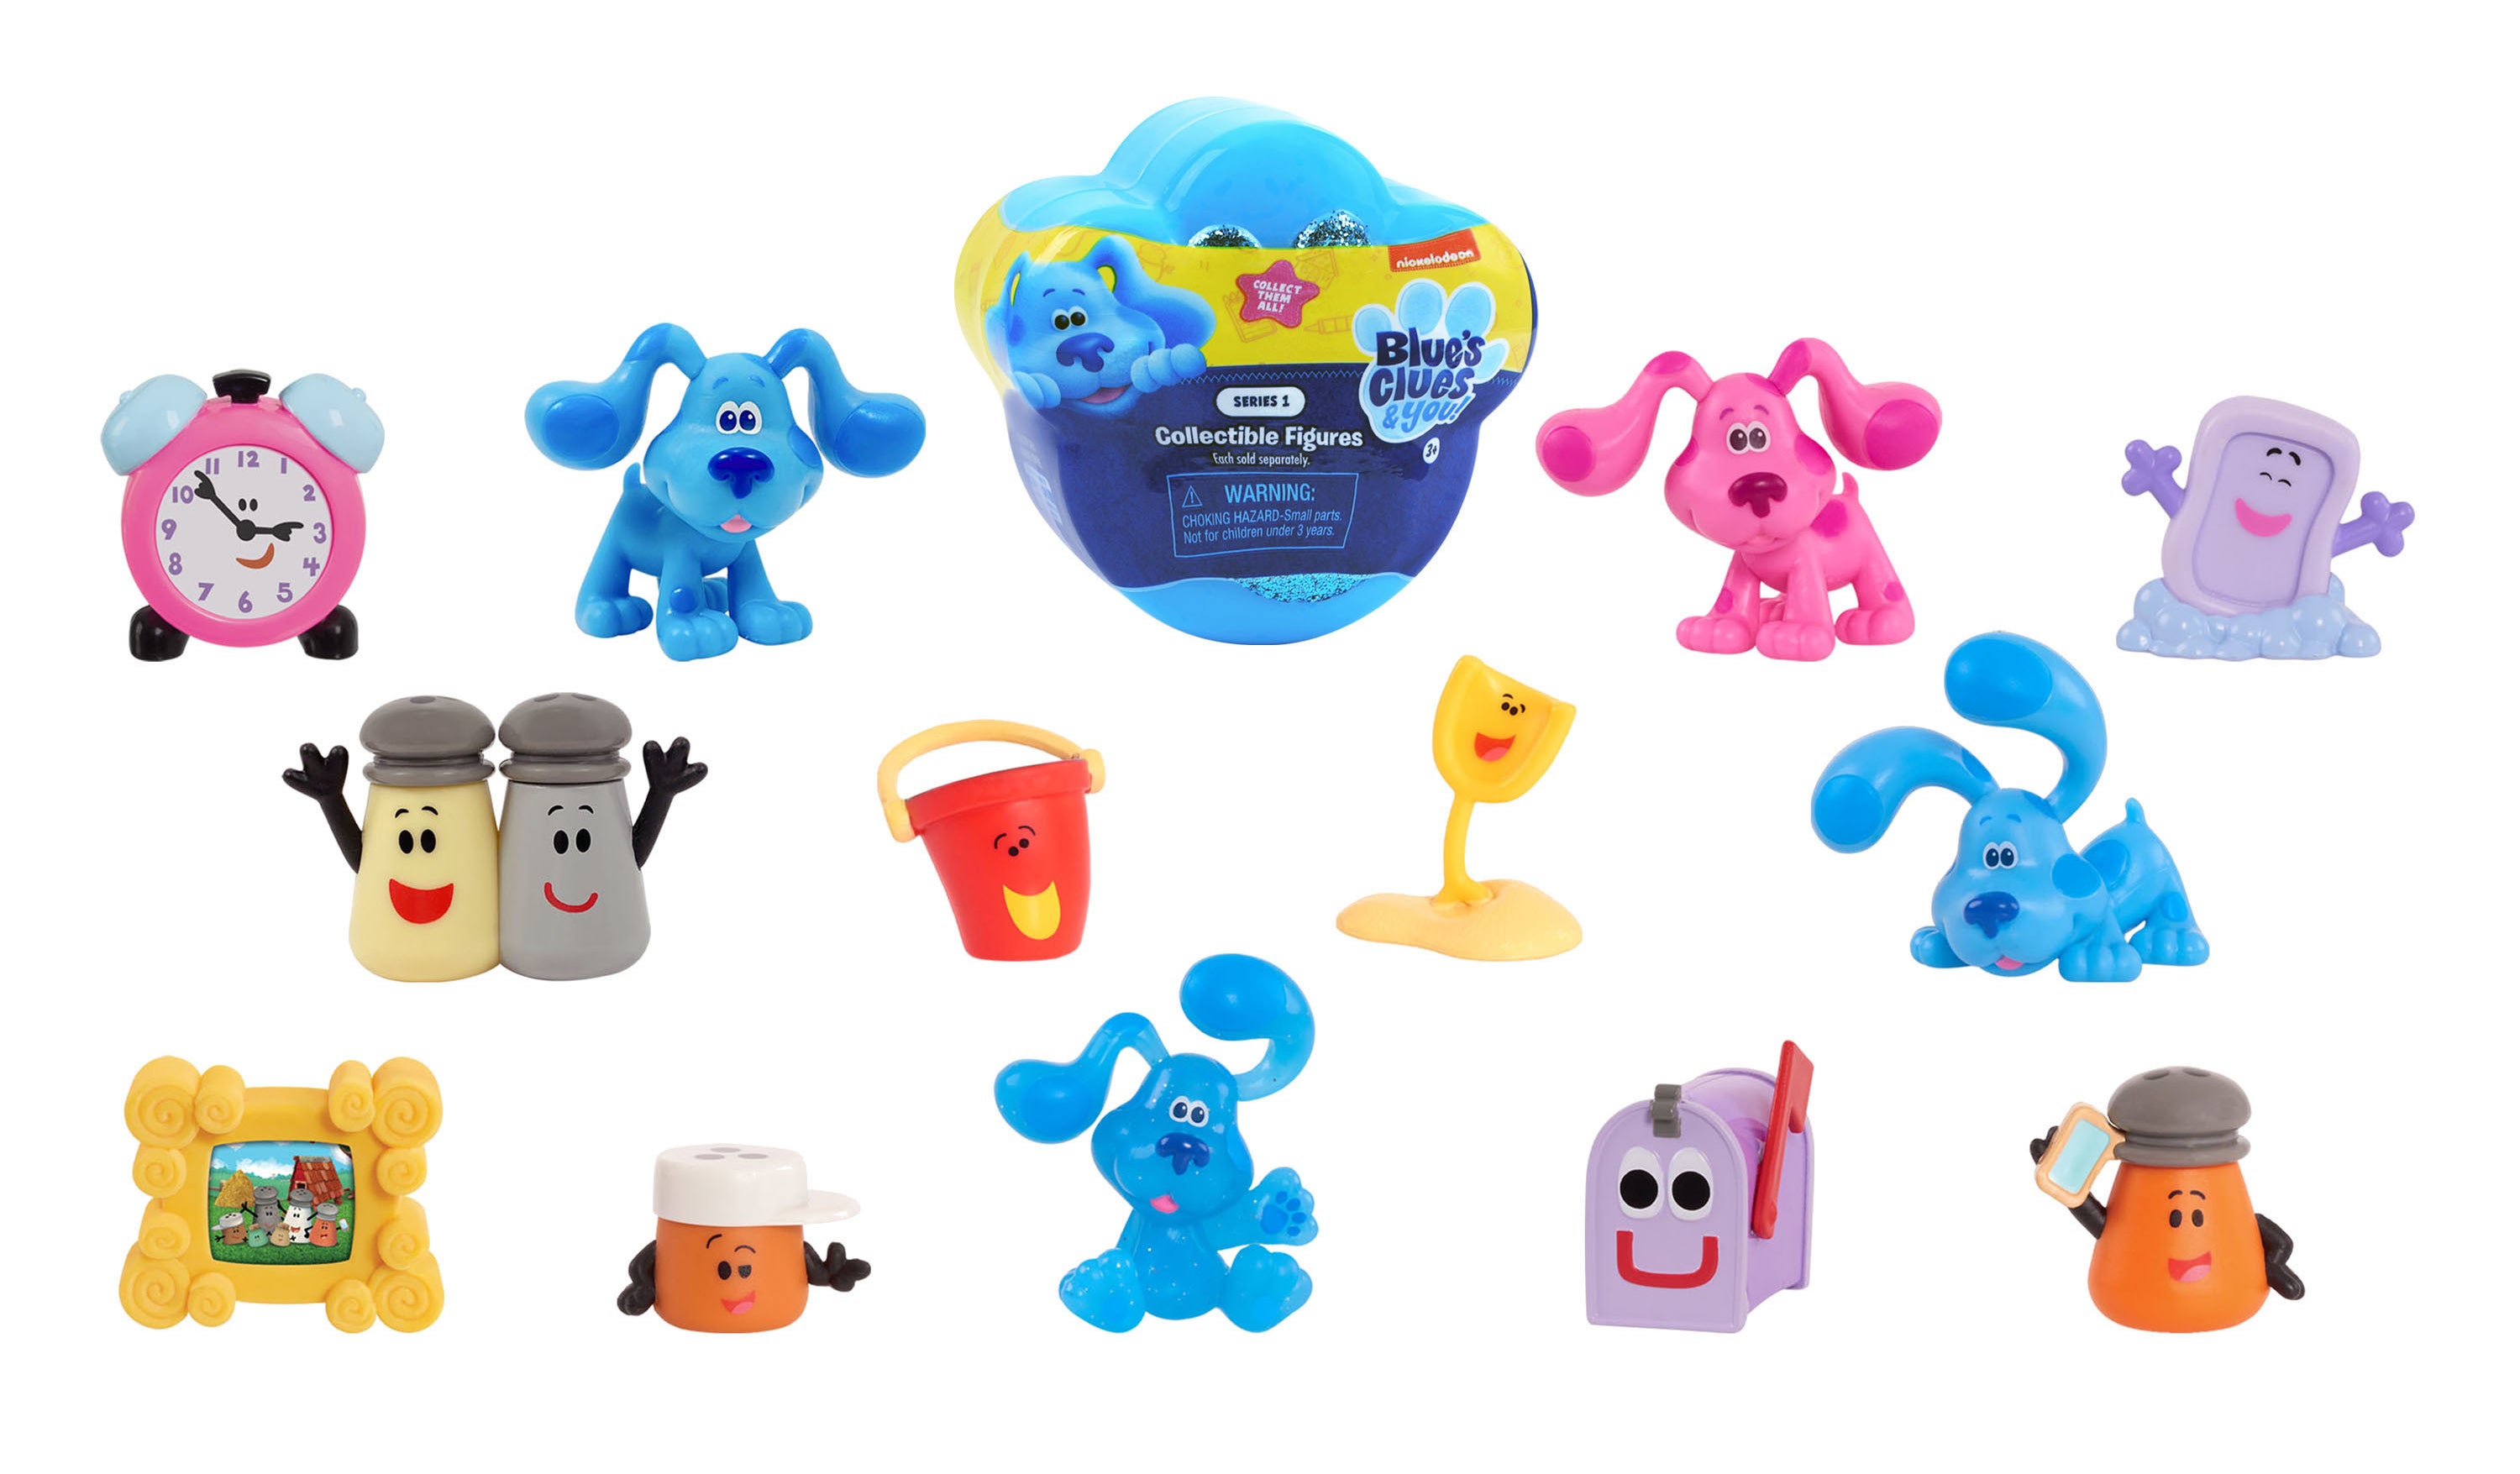 The Blue&#x27;s Clues collectibles